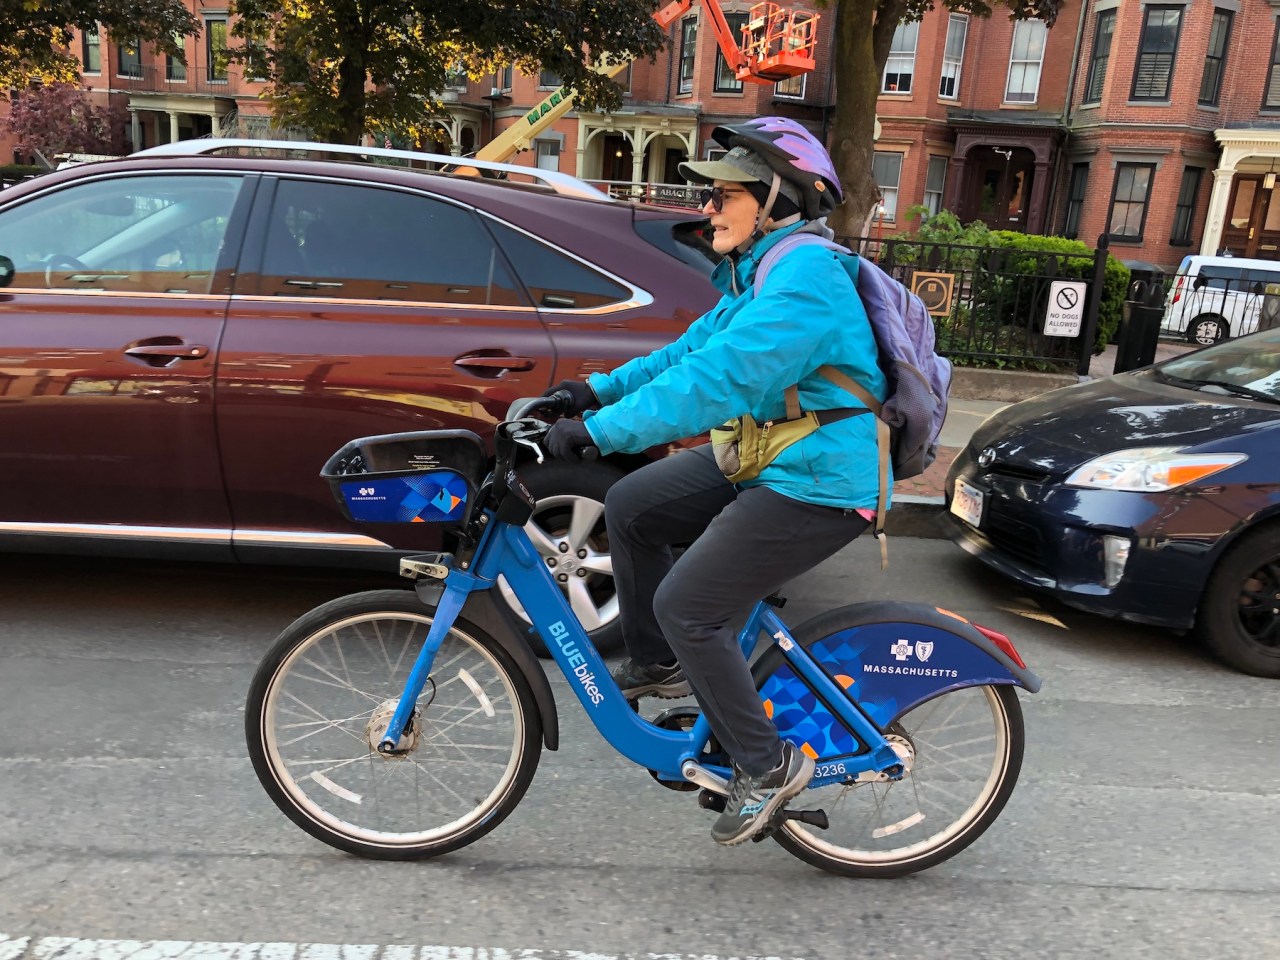 A woman wearing a teal jacket, purple backpack, a baseball cap, and a purple bike helmet pedals a Bluebike down the street next to a row of parked cars.